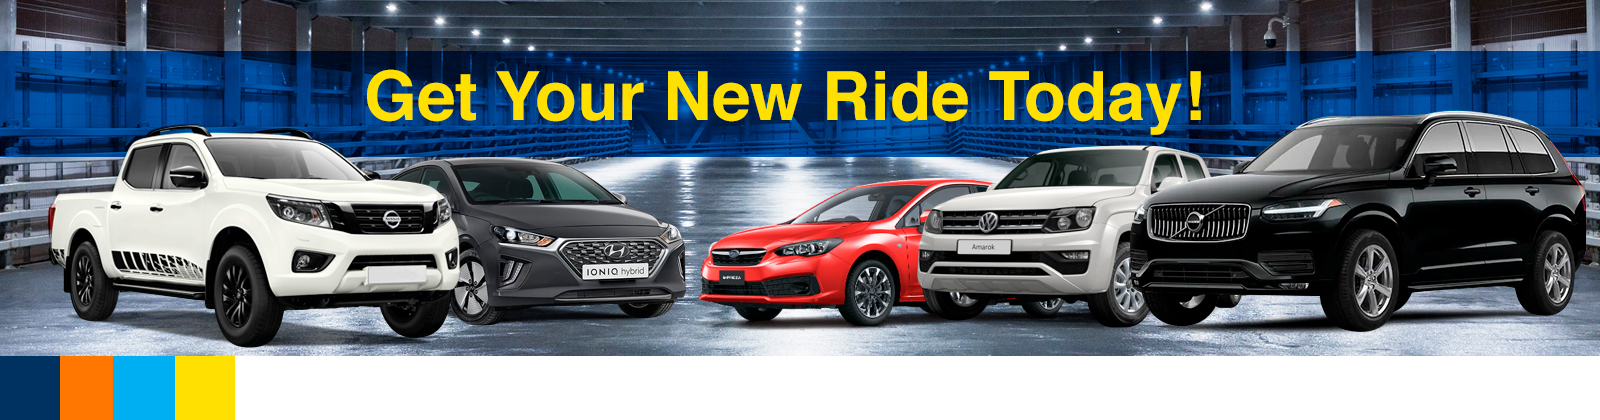 Get your new ride today!